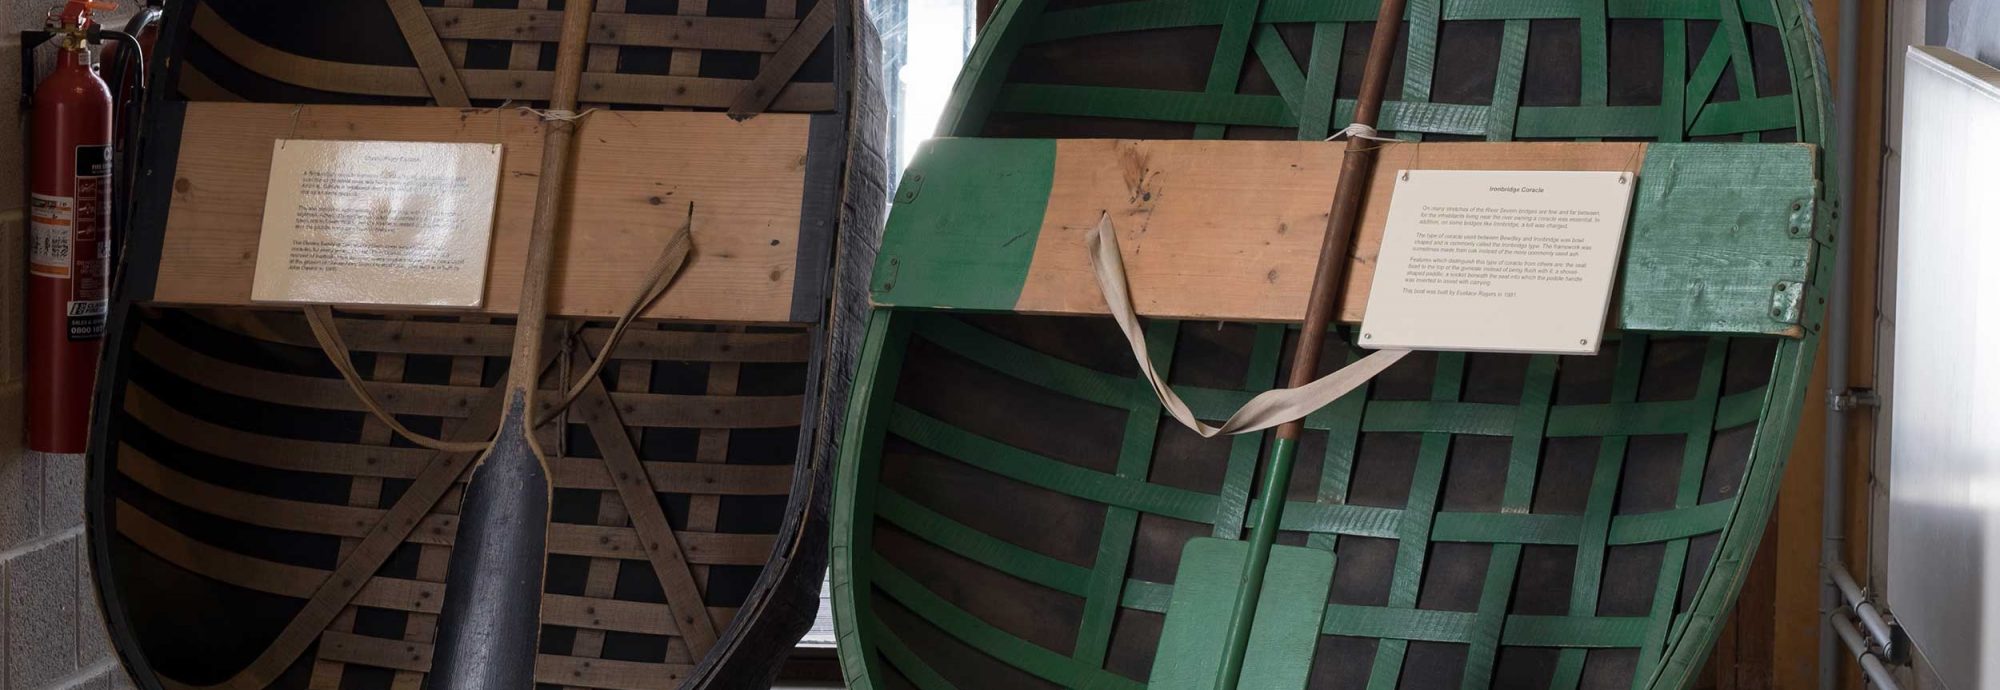 Photo of the Museum's two coracles, positioned side-by-side.